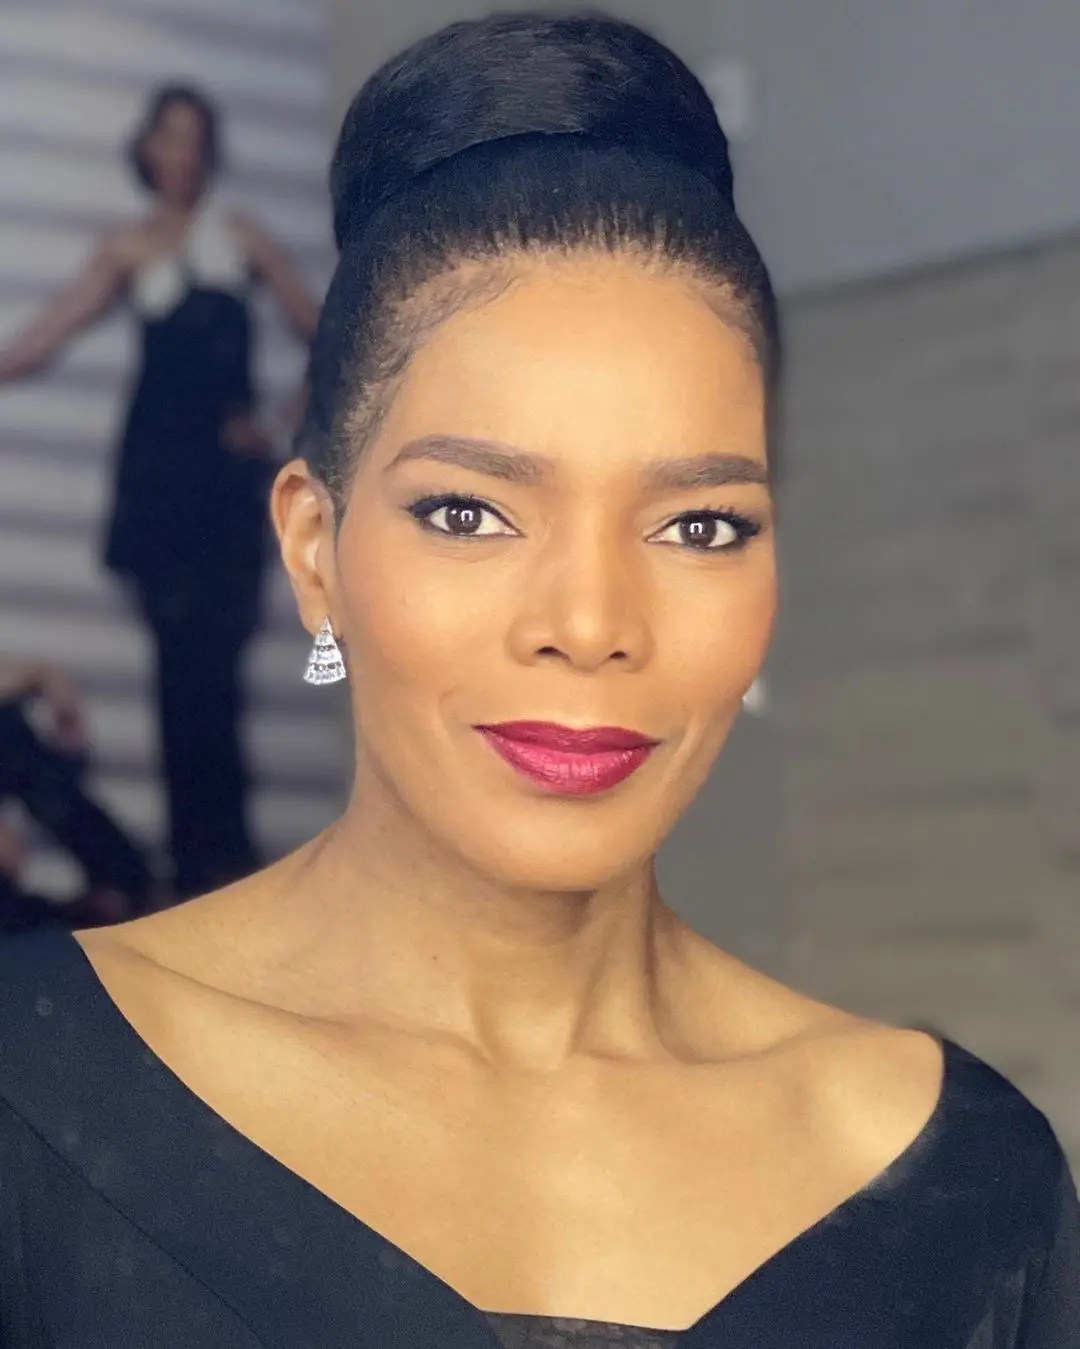 Twitter wants Connie Ferguson to take Legal Action Against Prophet Aaron?